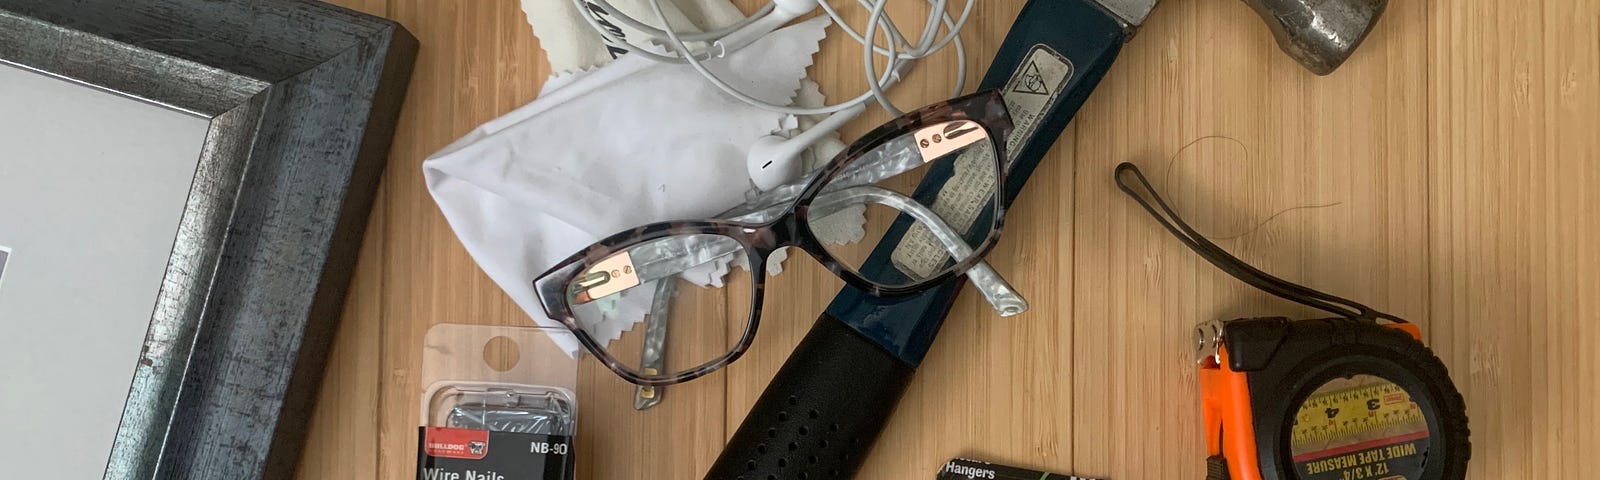 A hammer is surrounded by a measuring tape and variety of picture hangers on a wooden floor. The frame of a painting can also be seen in the frame. On top of the hammer is a pair of bifocals and glasses cleaning cloths, knotted into headphones.